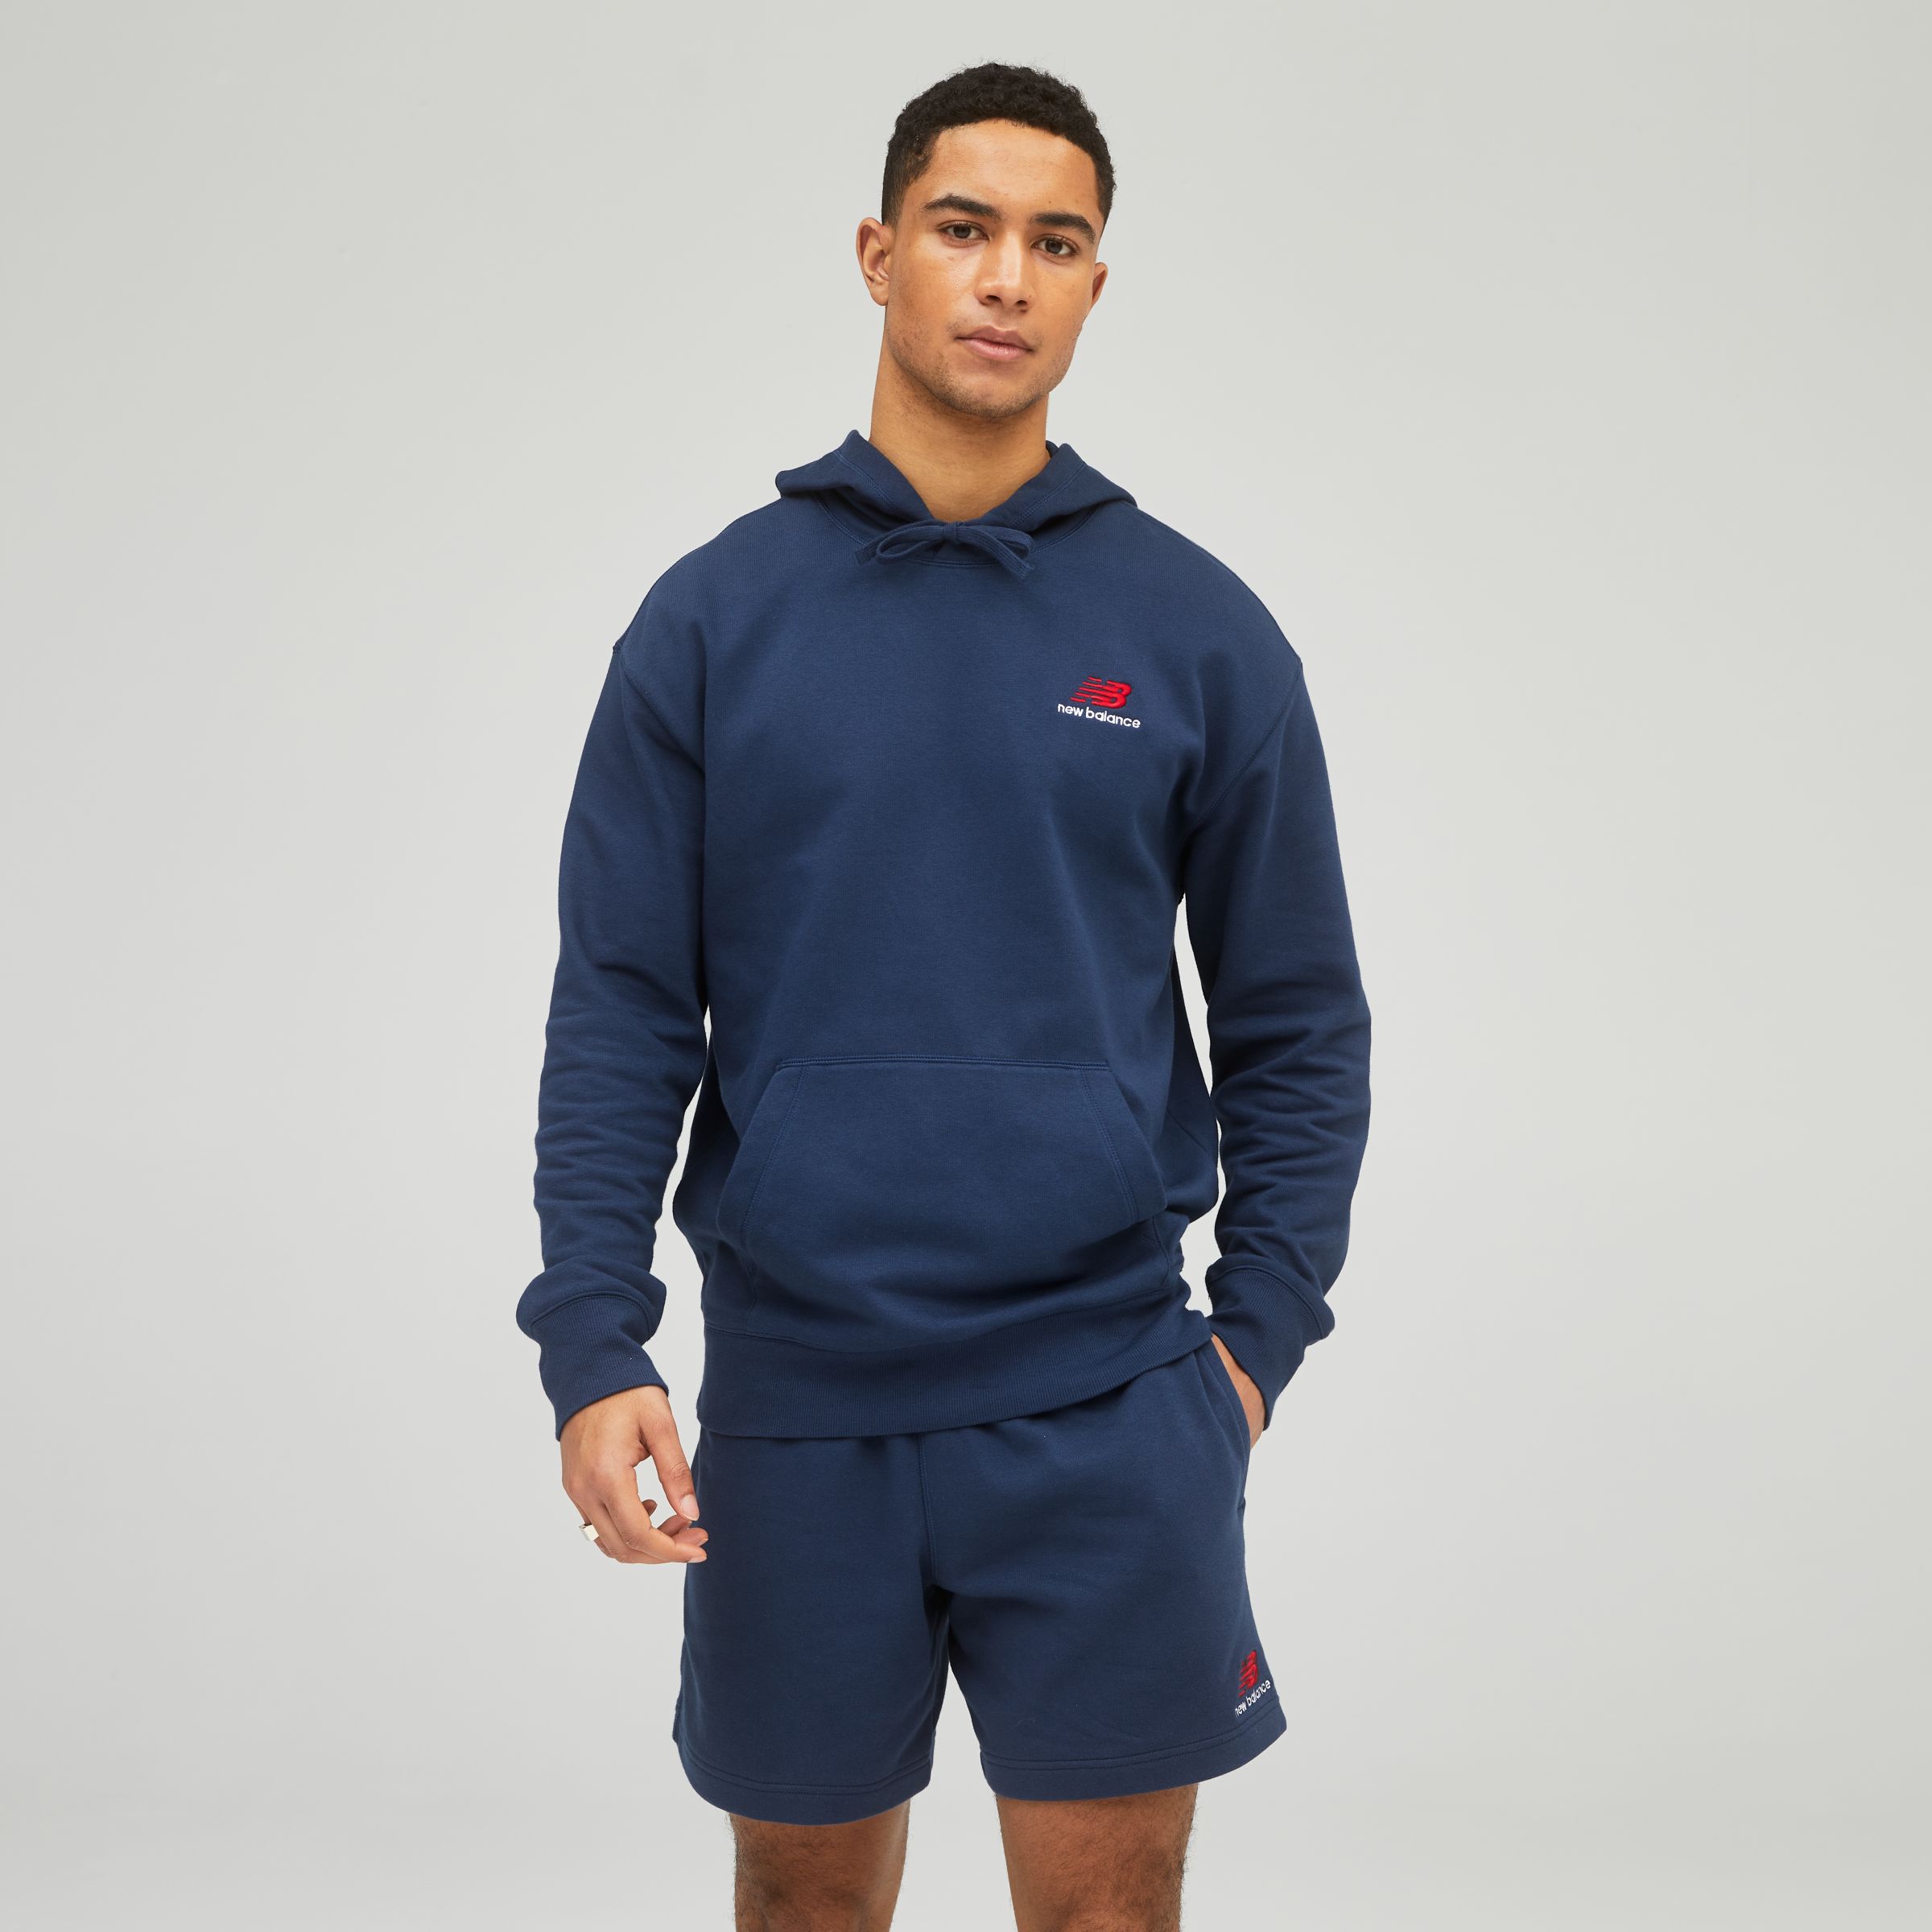 Uni-ssentials French Terry Hoodie - Joe's New Balance Outlet